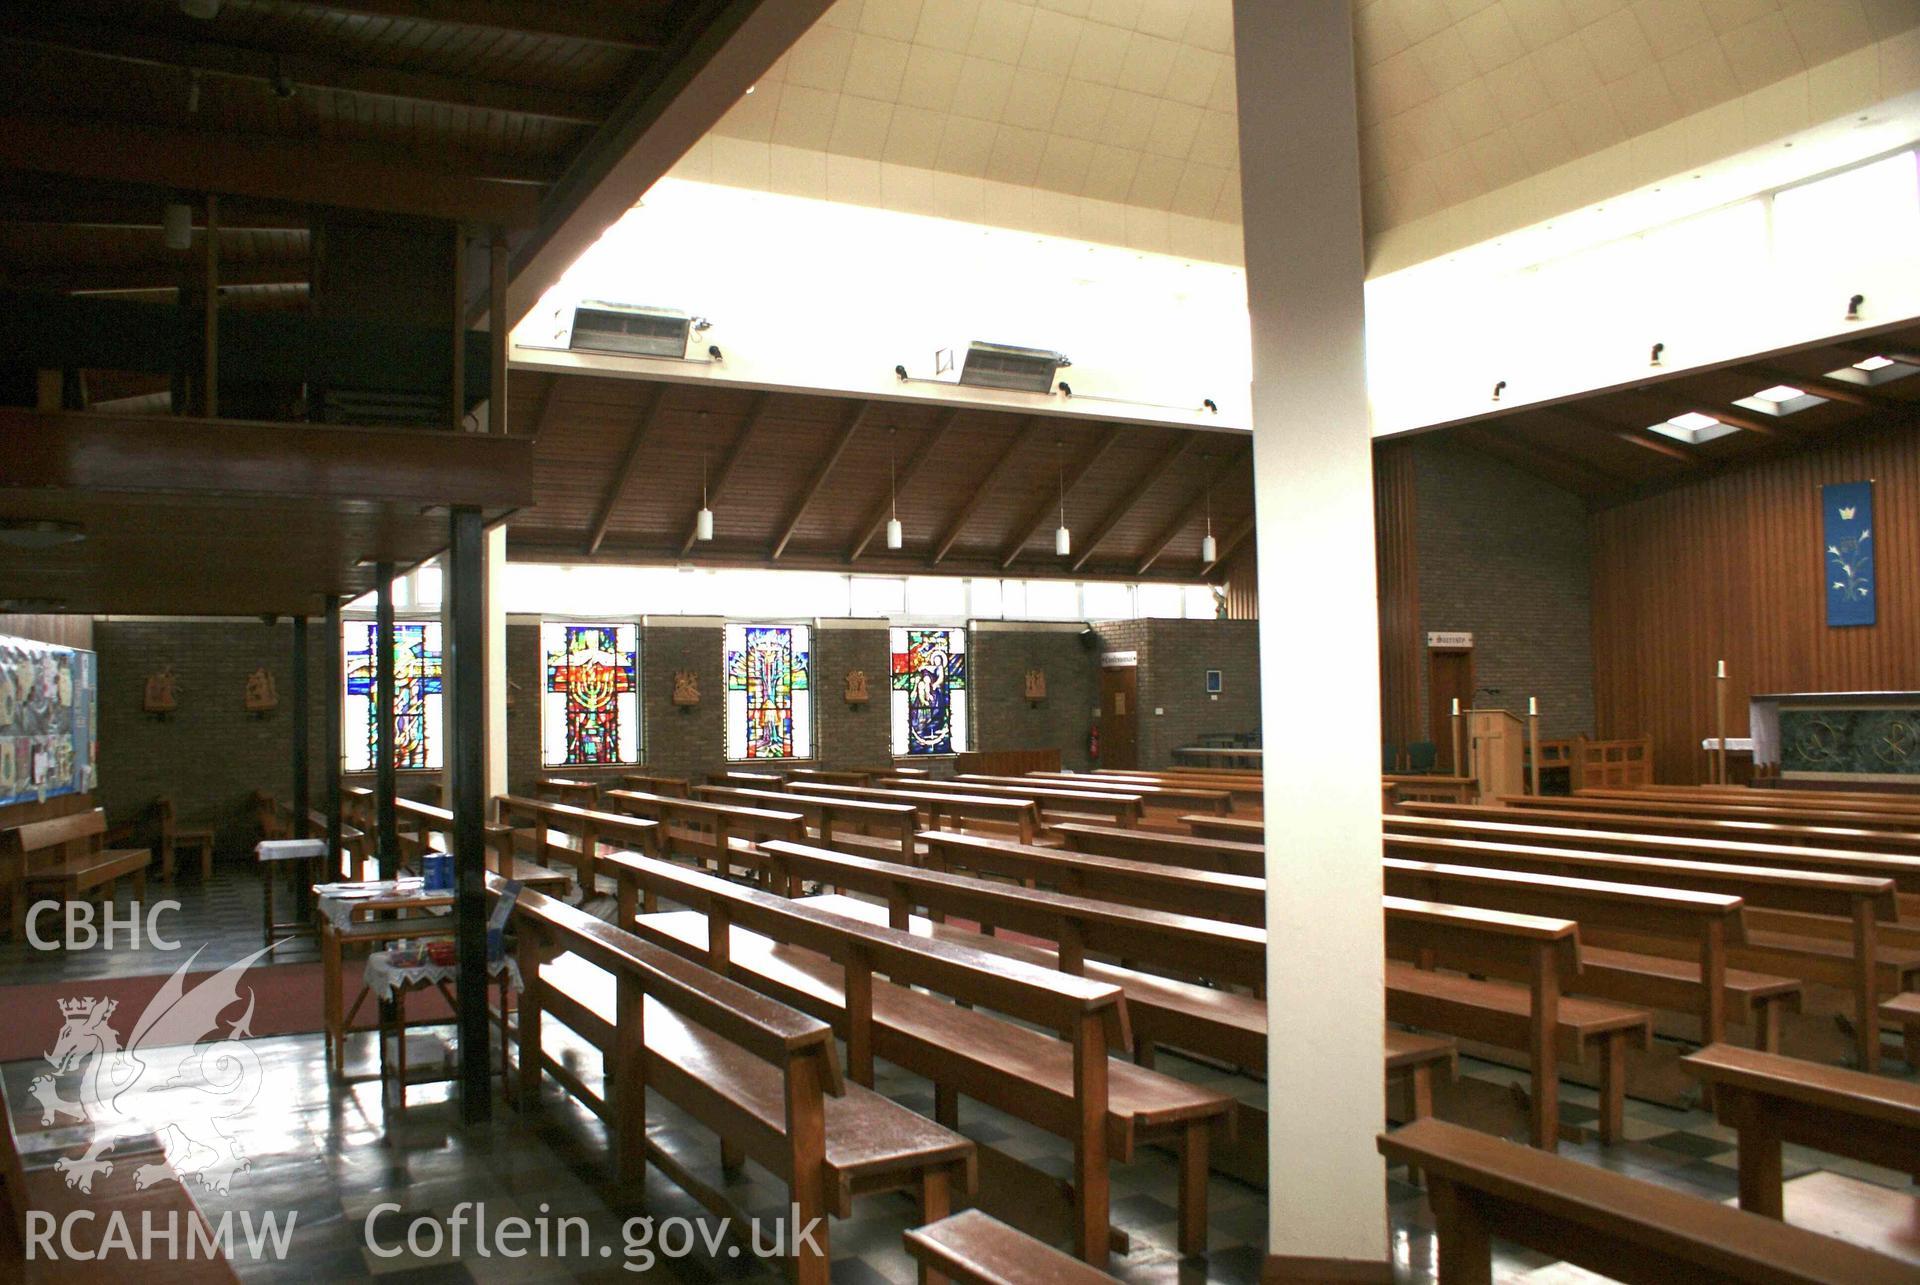 Digital colour photograph showing interior of St Mary Help of Christians Catholic church, Holyhead.